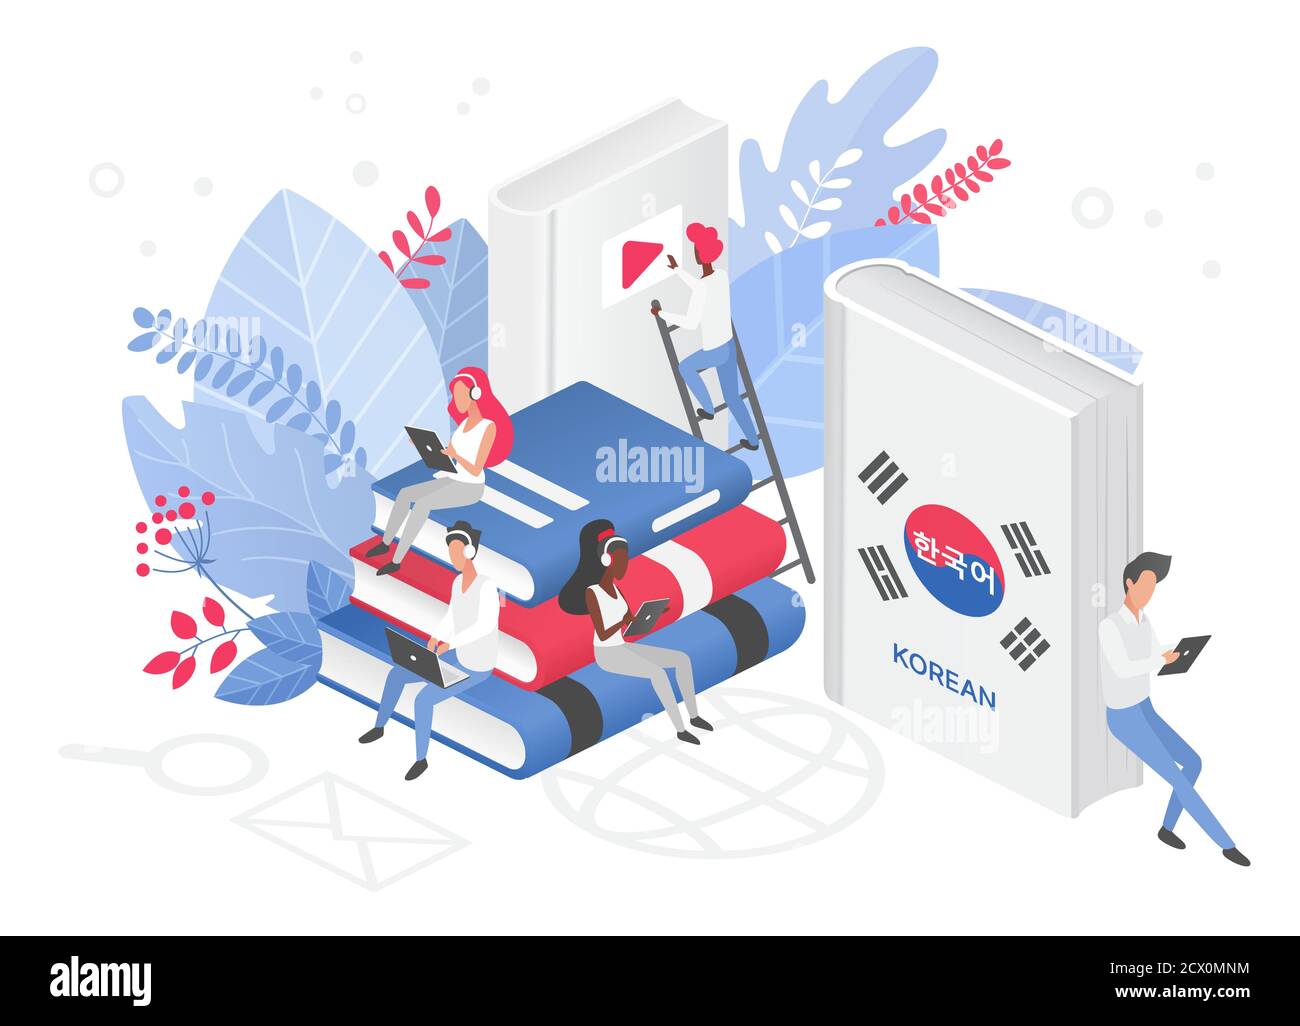 People learning Korean language isometric 3d vector illustration. Korea Distance education, online learning courses concept. Students reading books cartoon characters. Teaching foreign languages Stock Vector